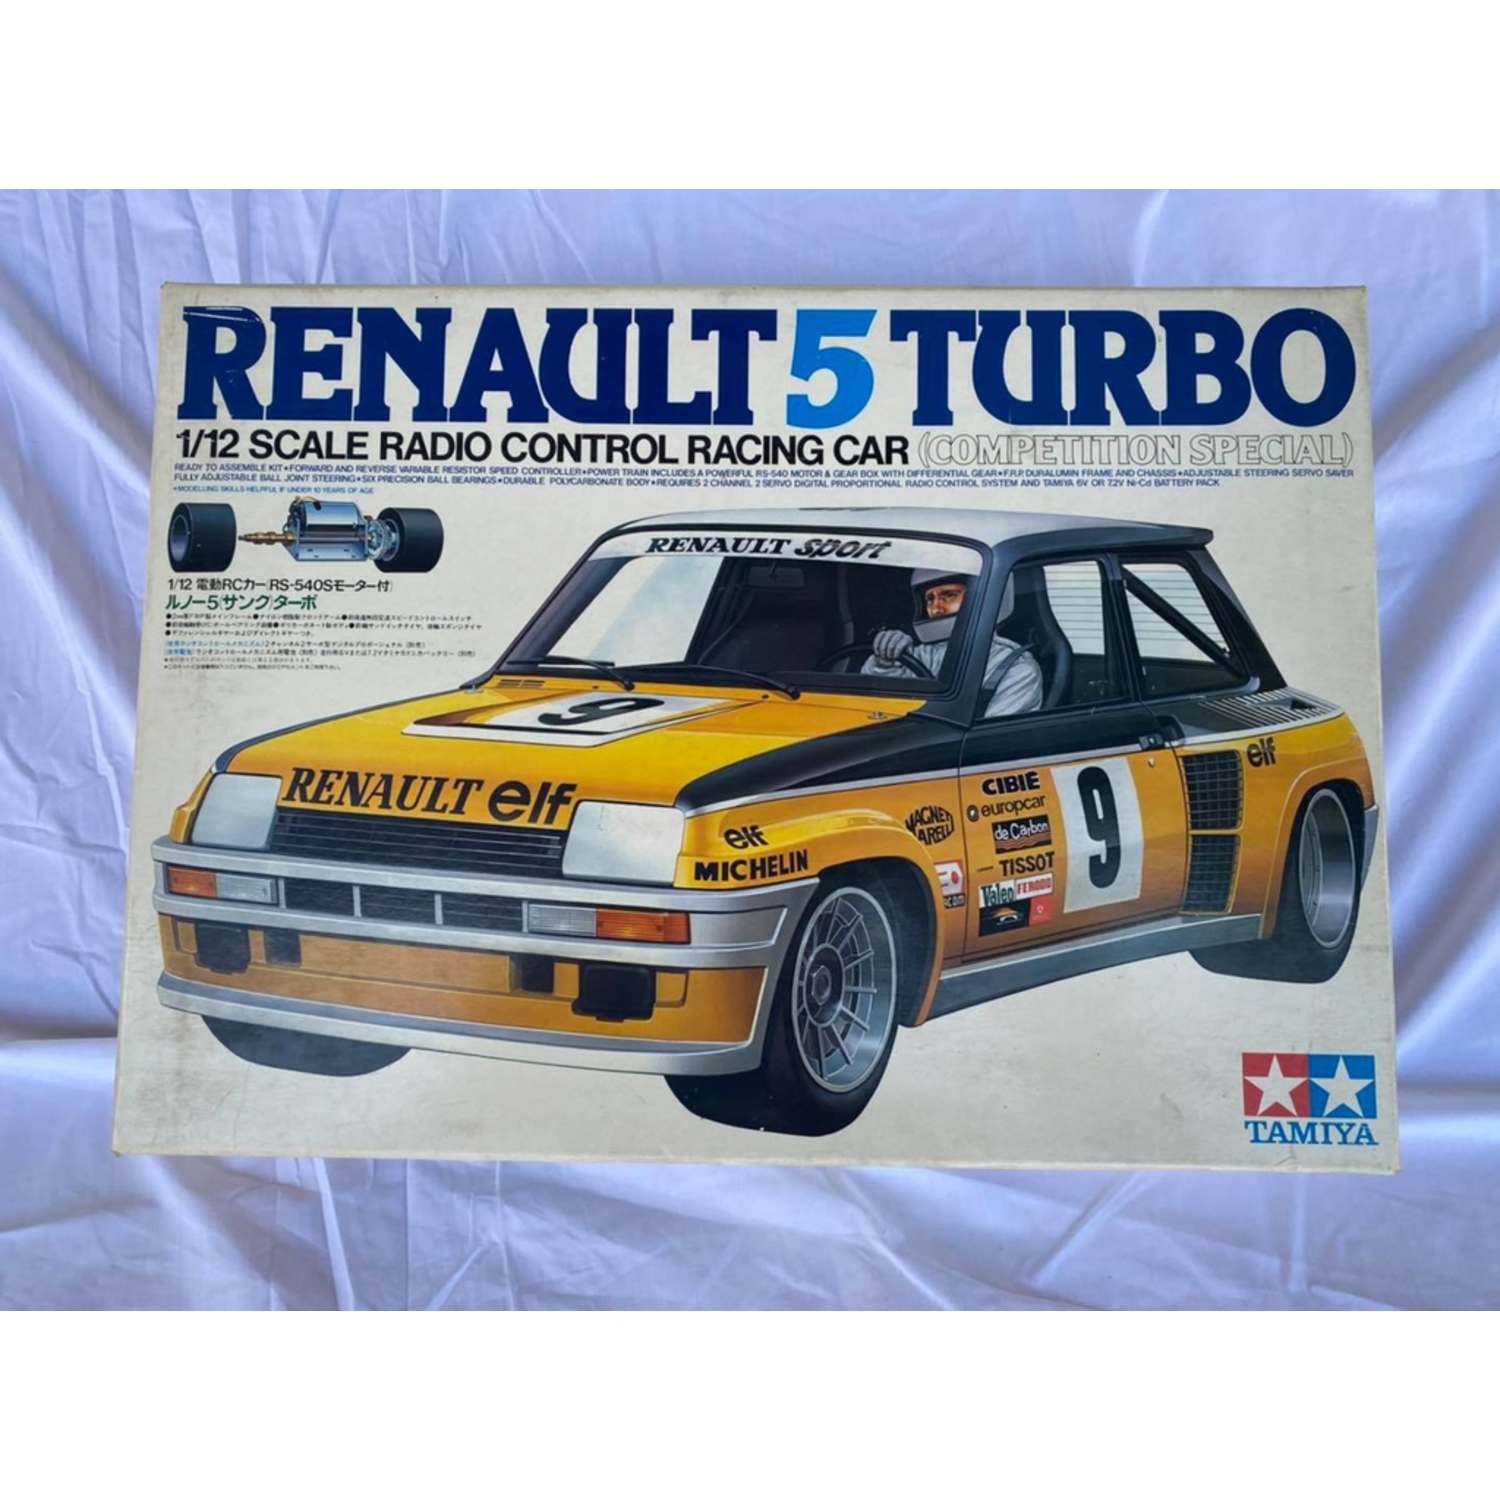 TAMIYA RENAULT 5 TURBO COMPETITION SPECIAL 1981 VINTAGE KIT - www